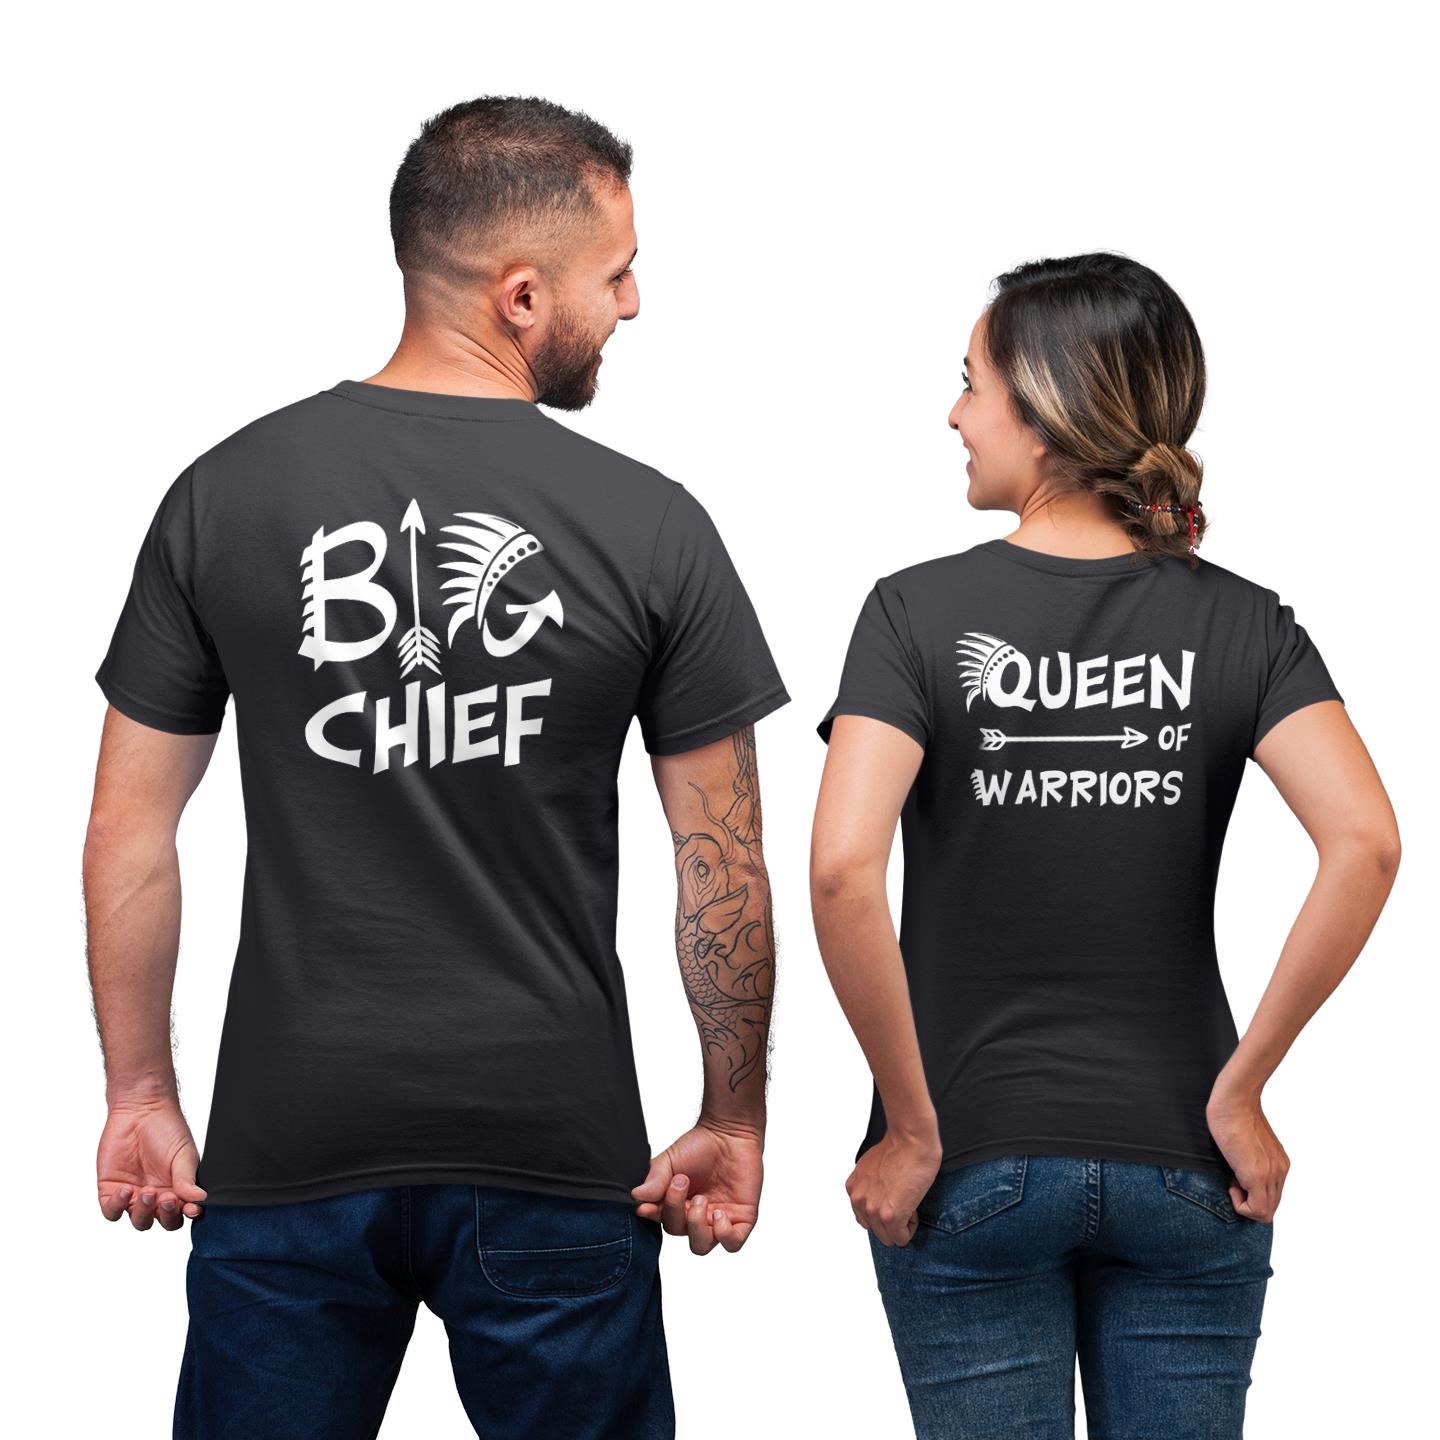 Best Match Big Chief And Queen Of Warriors Shirt For Lover Couple Matching T-shirt